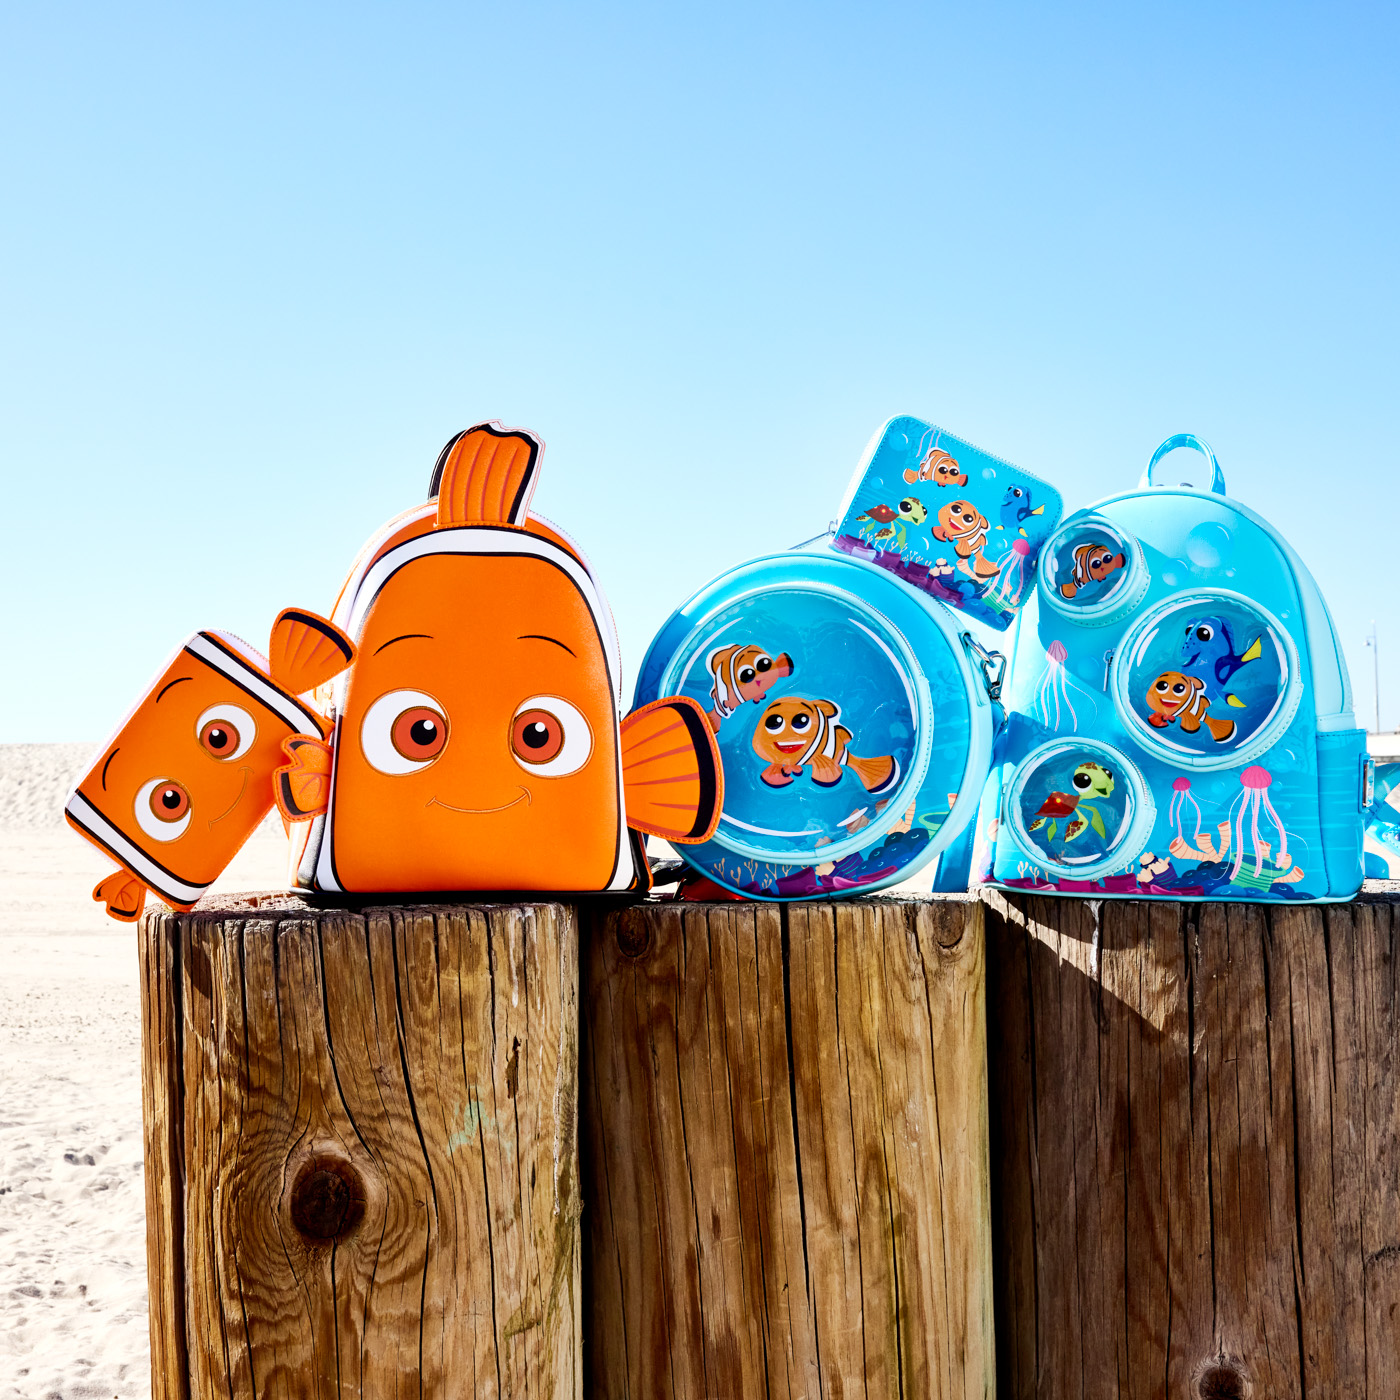 A bag and wallet designed to resemble Nemo, an orange clown fish. Next to it are two bags and a wallet, all featuring stylized art of Nemo, Marlin, Dory, and Crush swimming in the ocean. All the bags sit on top of some wooden poles at the beach.